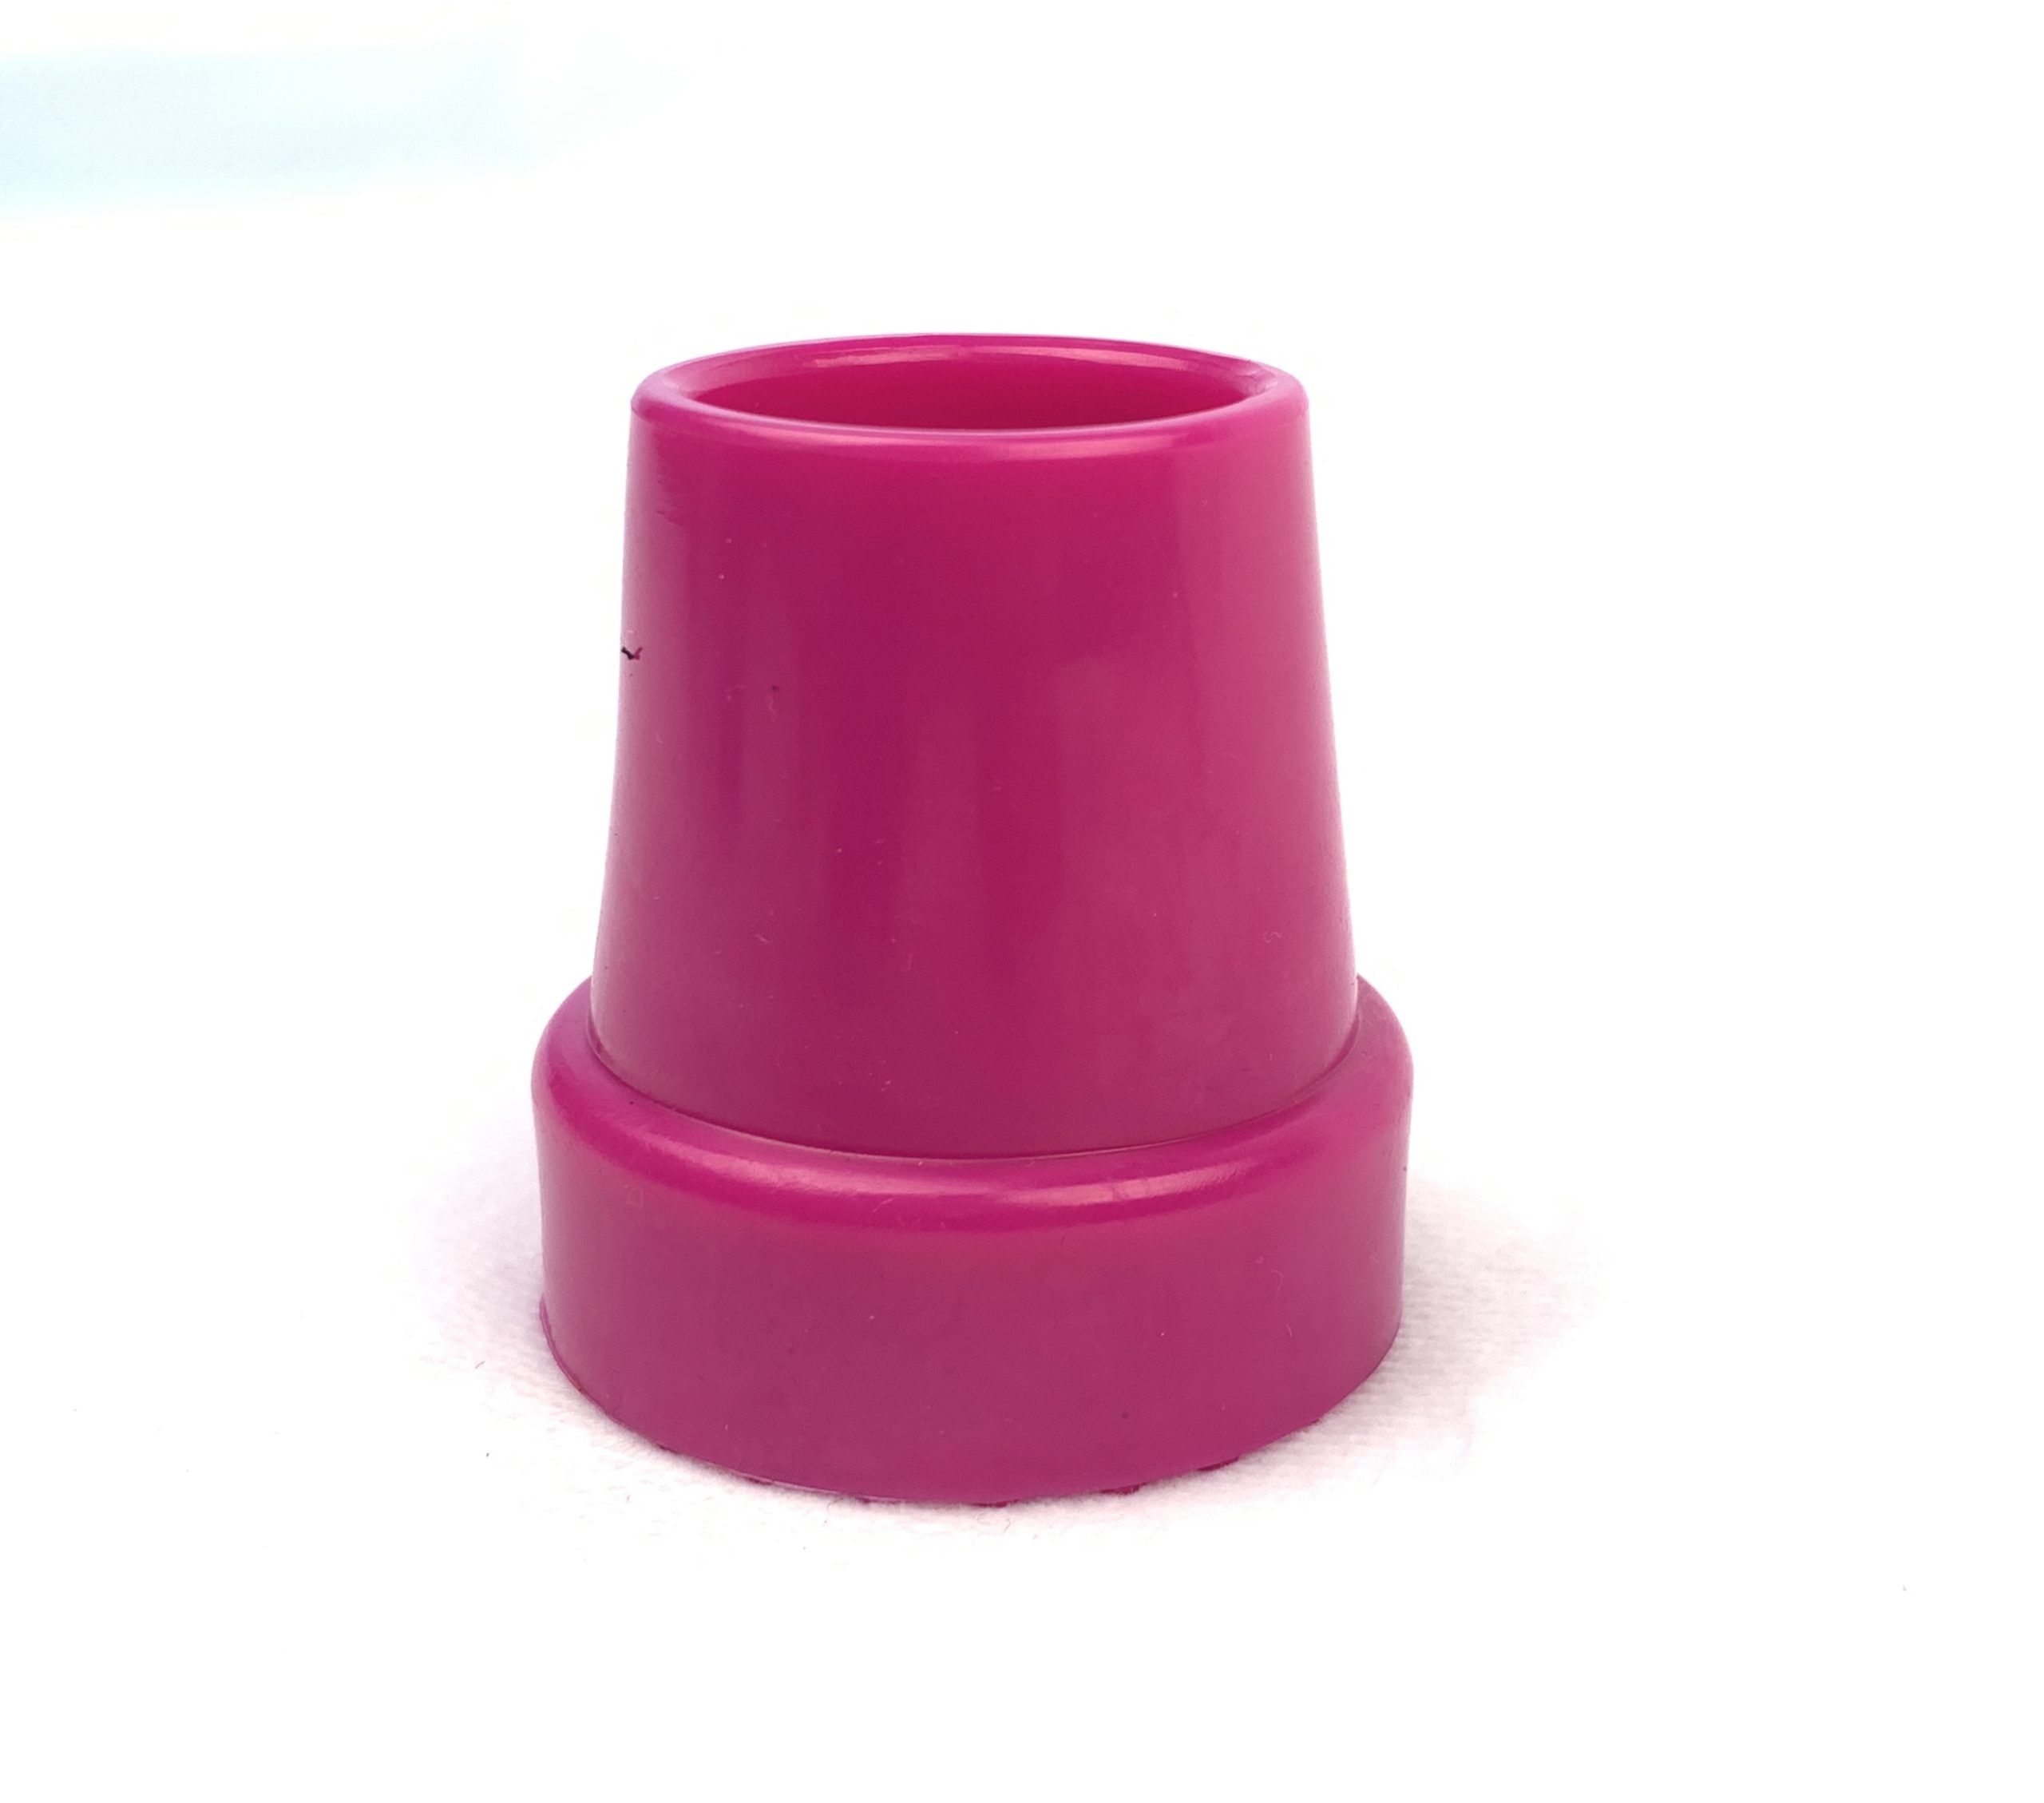 Coloured Rubber Ferrules 25mm reinforced Suitable for Neo Walk Sticks